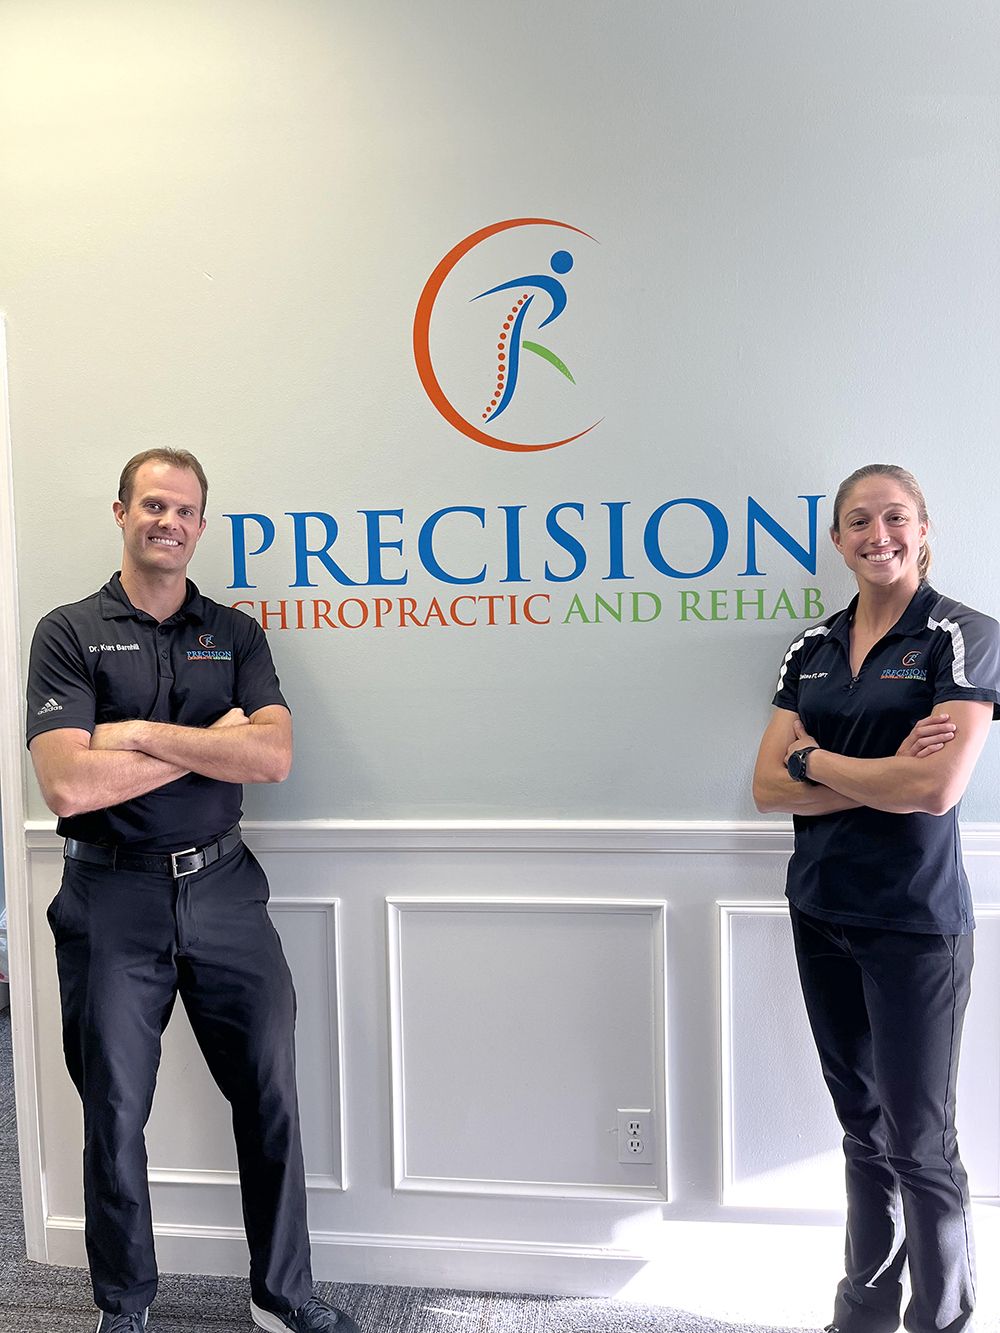 CHIROPRACTOR AND PHYSICAL THERAPIST IN STUART, FL